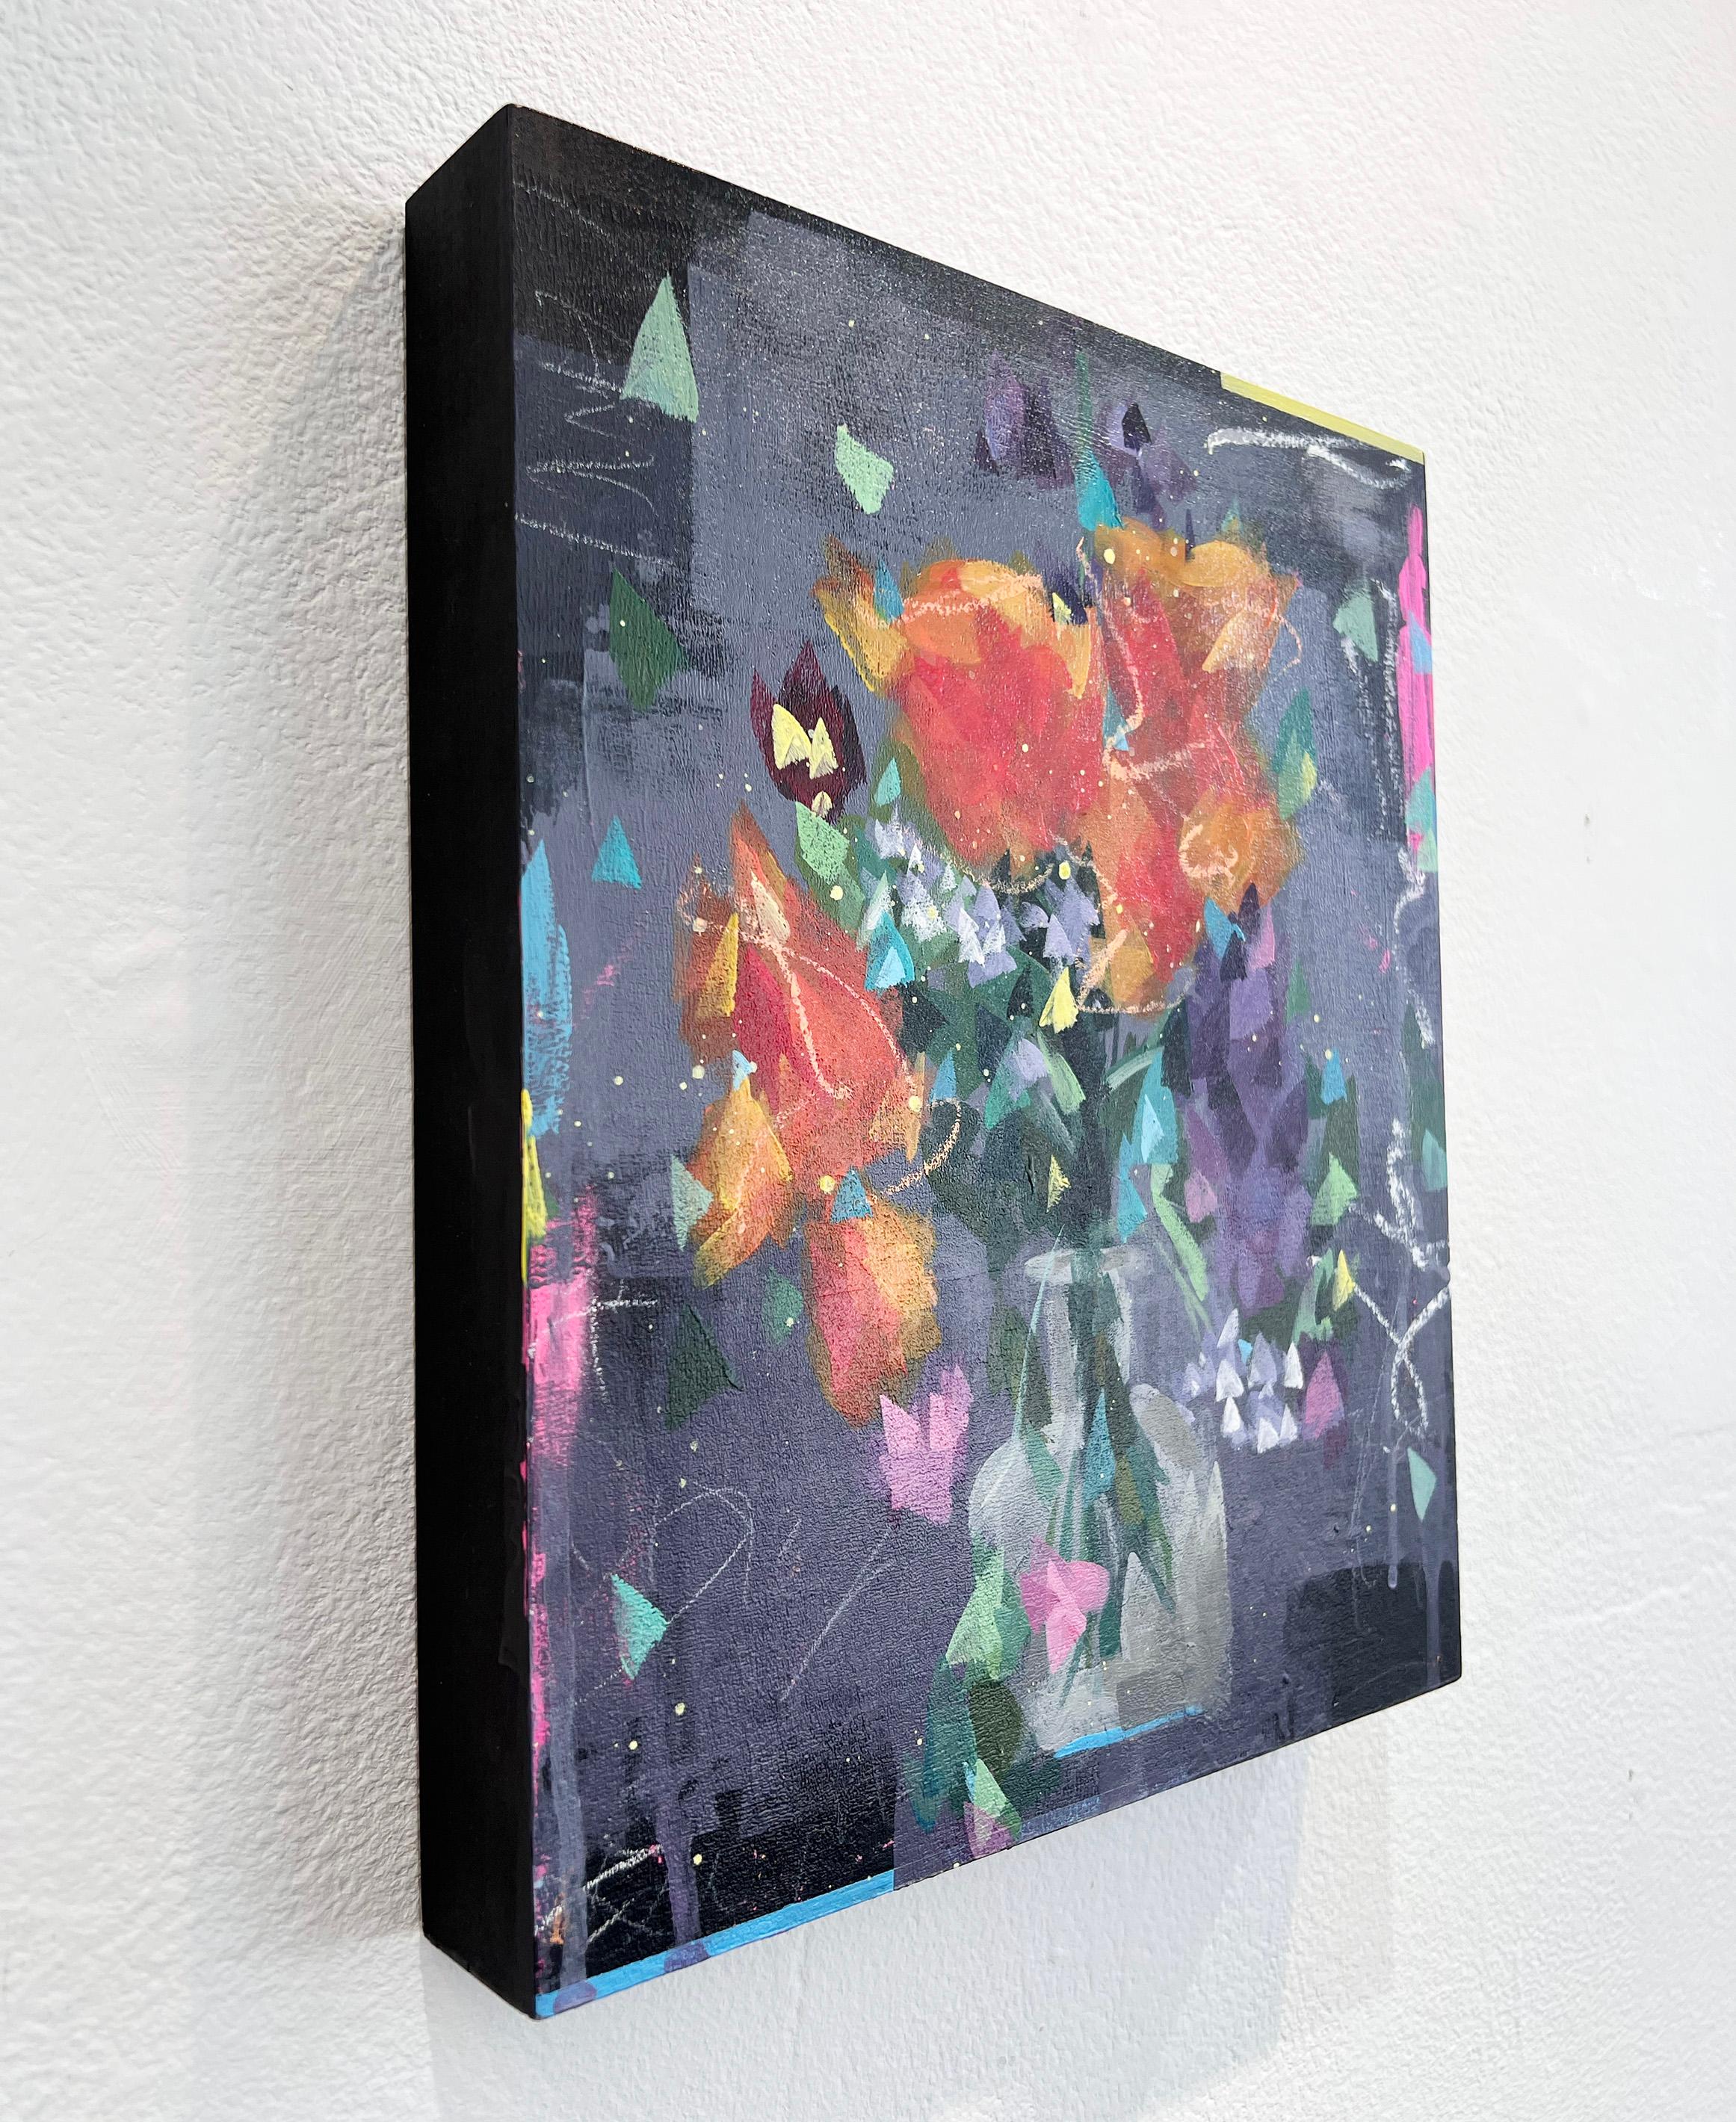 'Joyful' is an impressionist floral painting by urban impressionist painter Steve Javiel. The piece incorporates a blend of acrylic paints, spray paints, and solid markers on a wood panel, measuring 12 x 10 x 1.5 inches in size.

“The strong